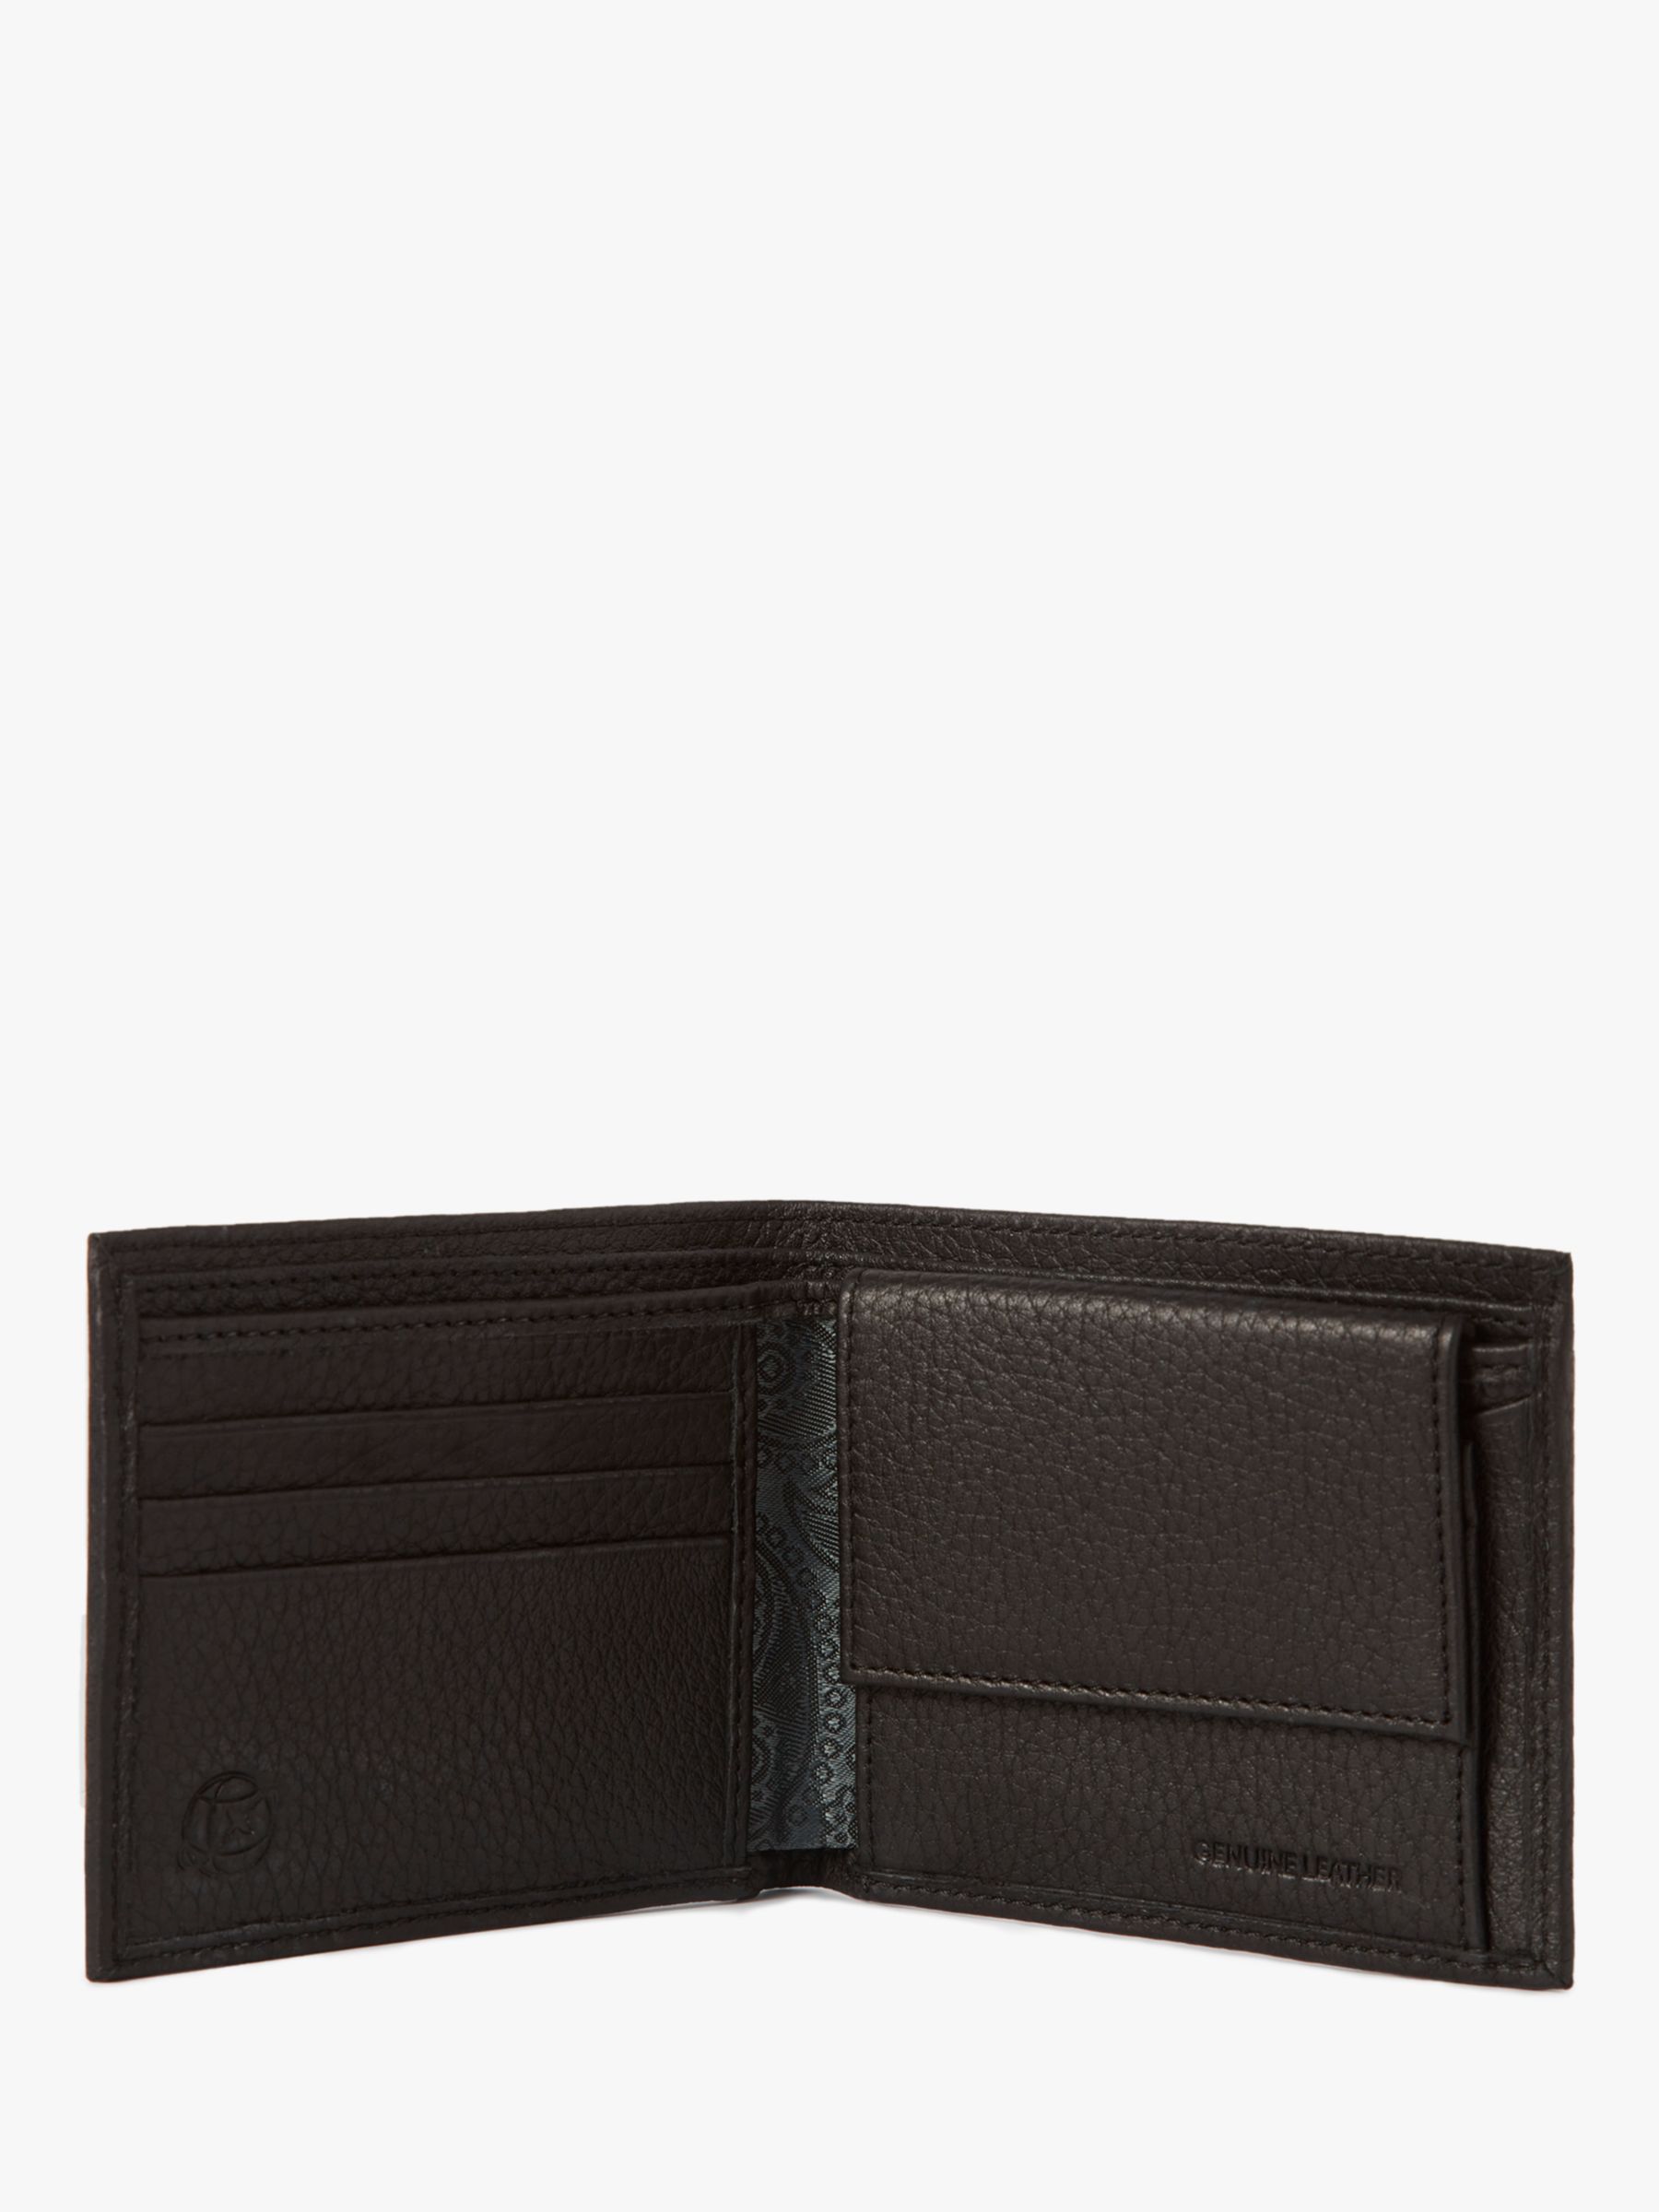 Simon Carter Soft Leather Coin Wallet, Black, One Size